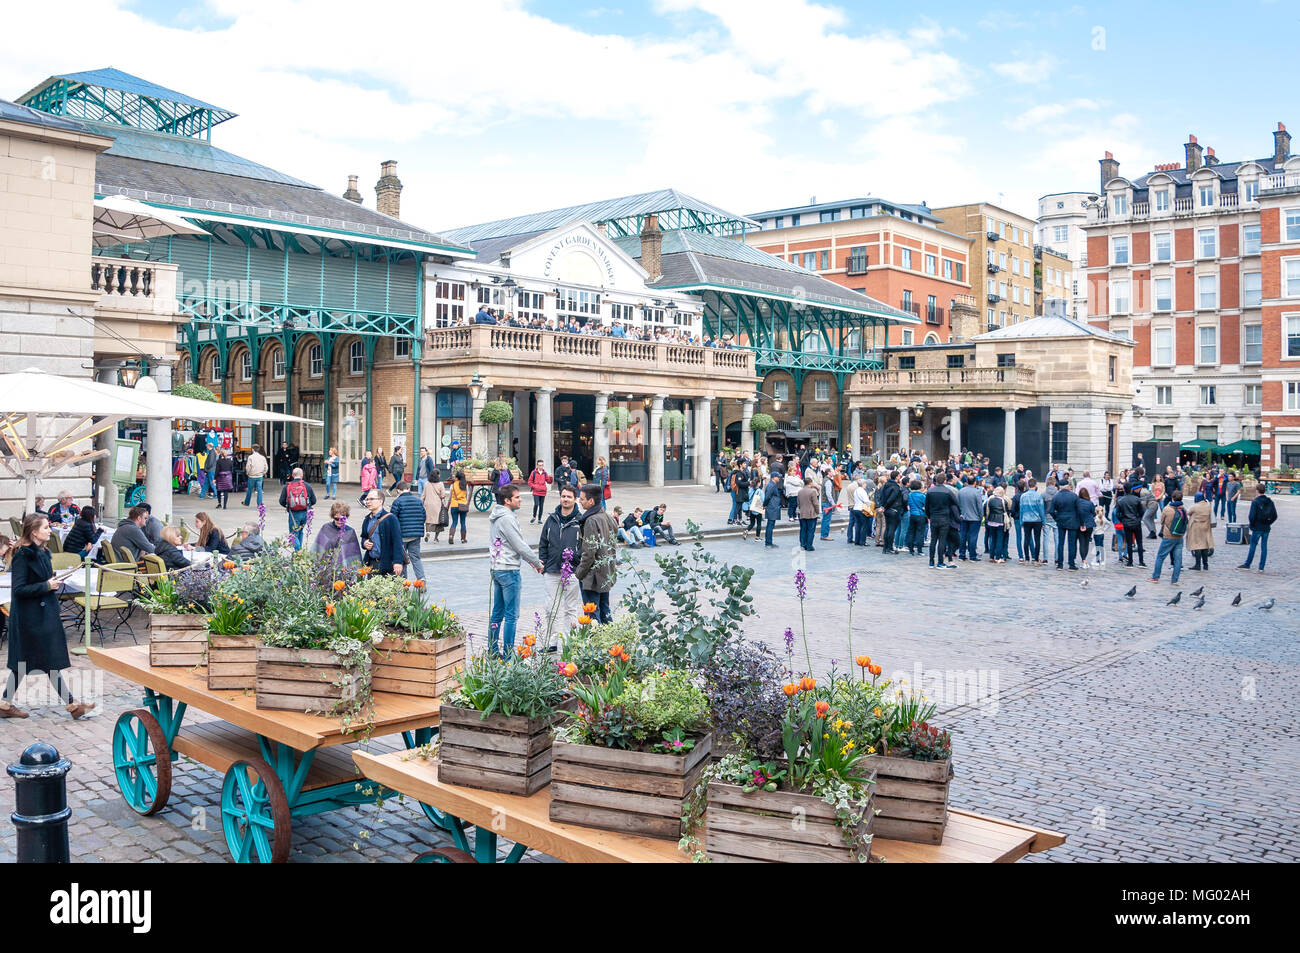 Covent Garden Market Square, Covent Garden, City of westminster, Greater London, Angleterre, Royaume-Uni Banque D'Images